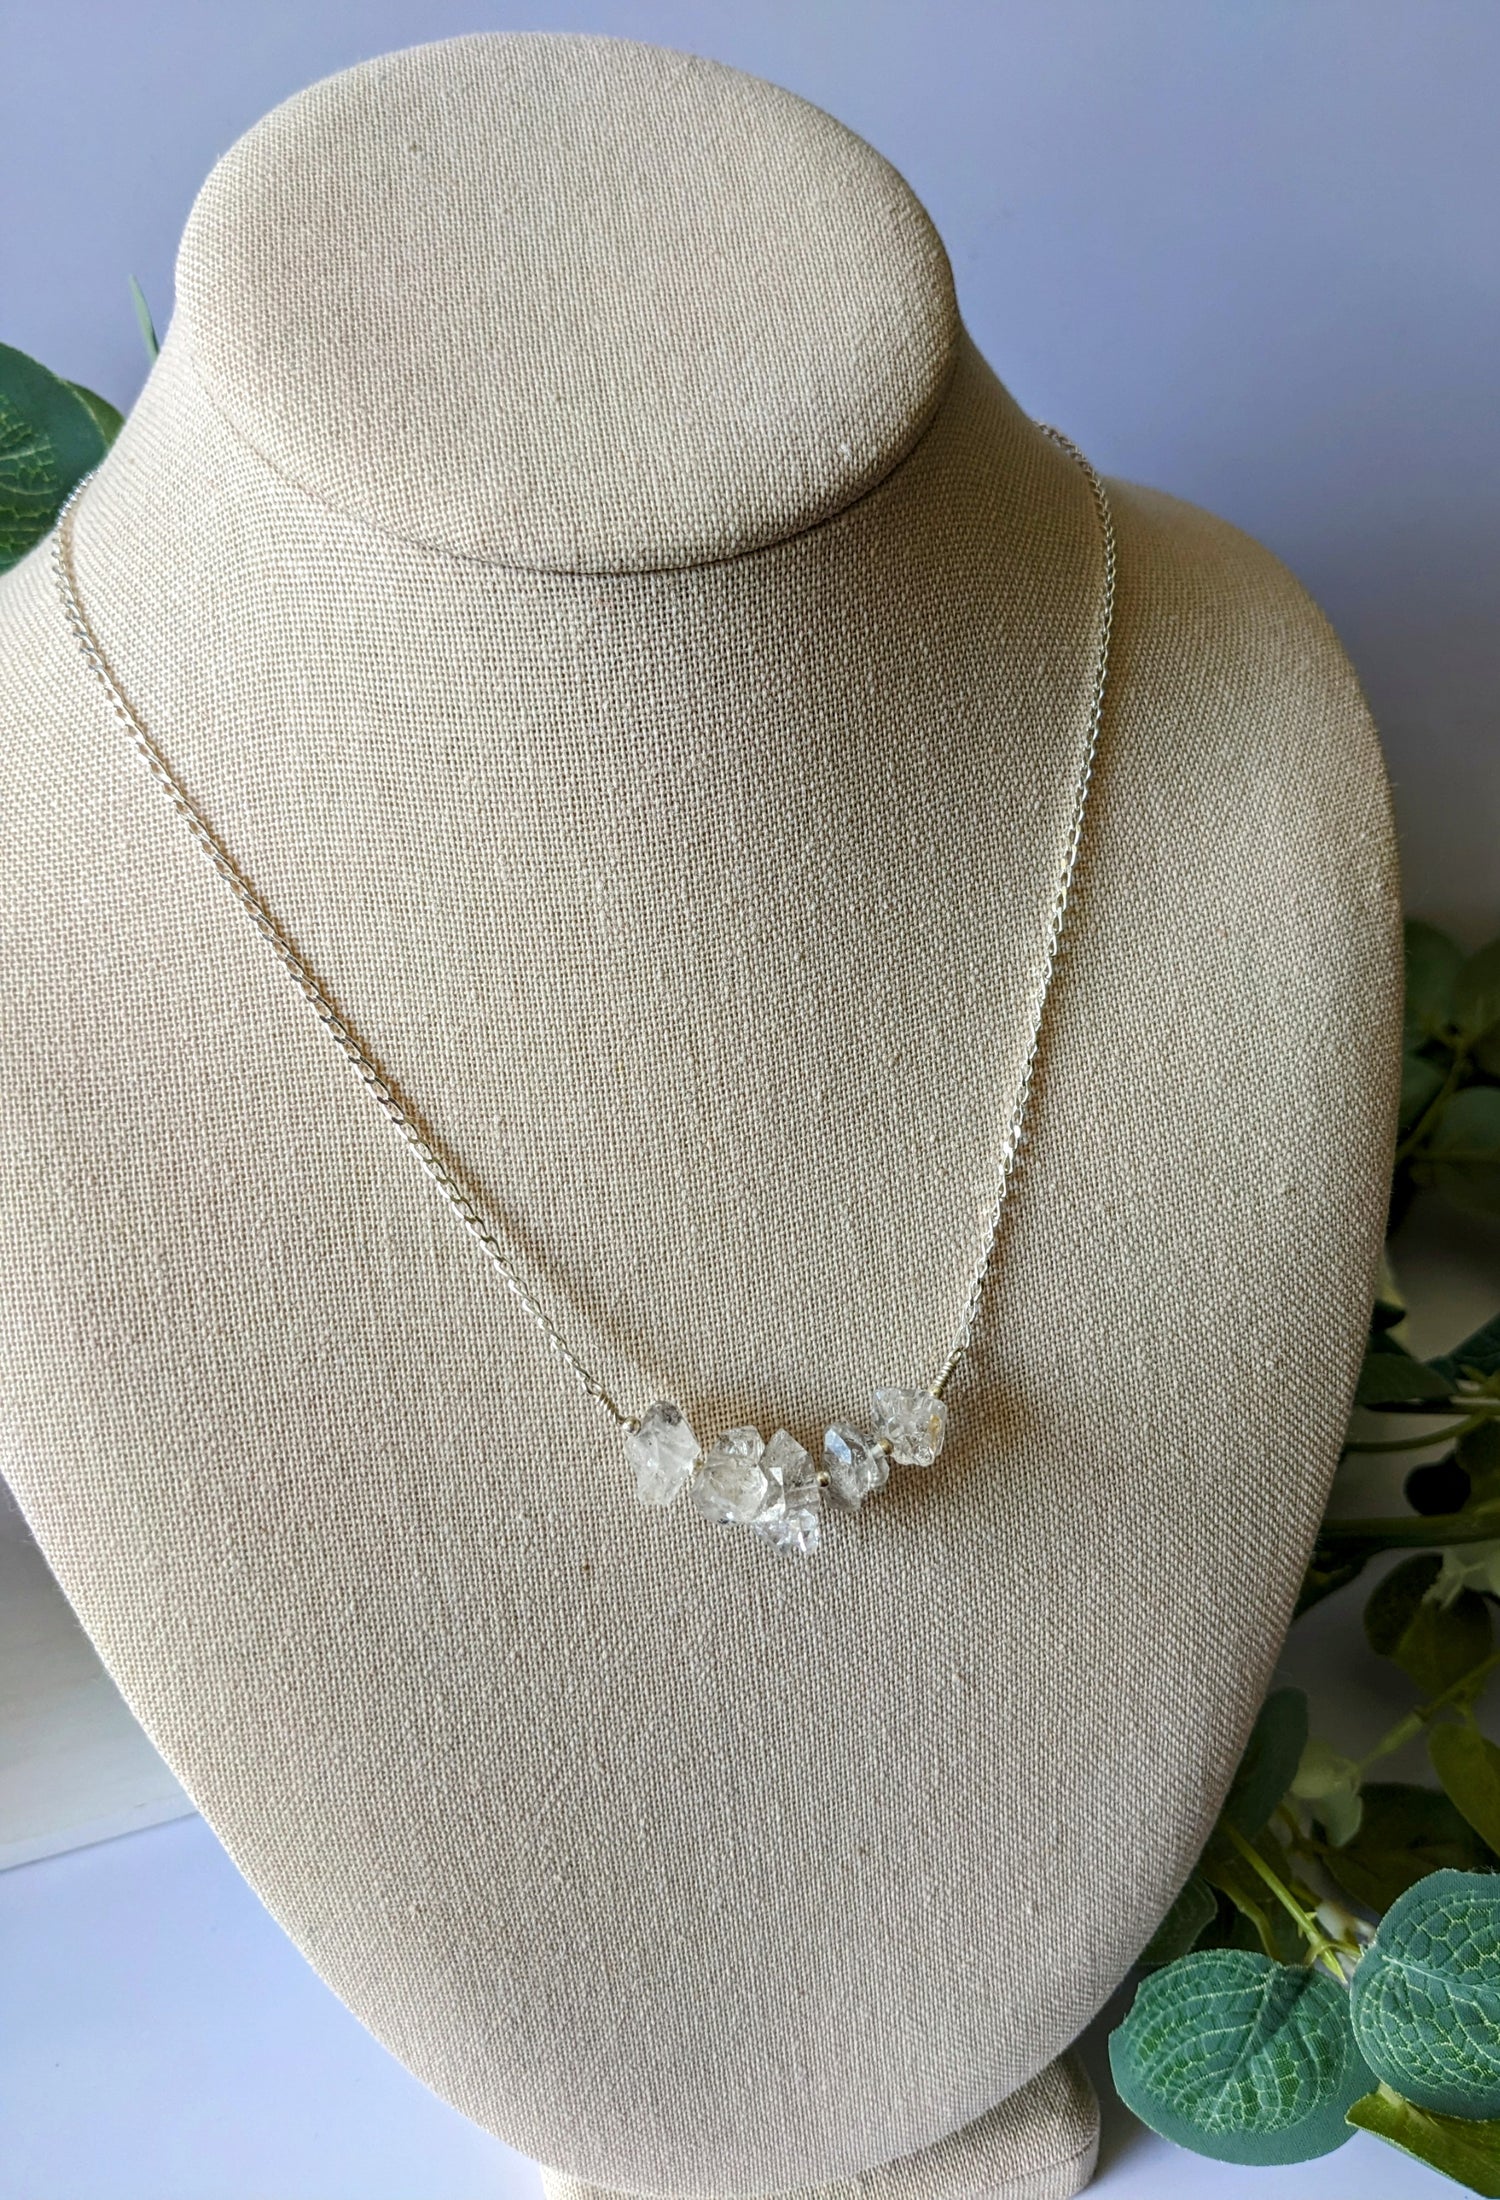 Sterling silver chain with five rough cut HERKIMER DIAMOND stones on a jewelry bust surrounded by greenery